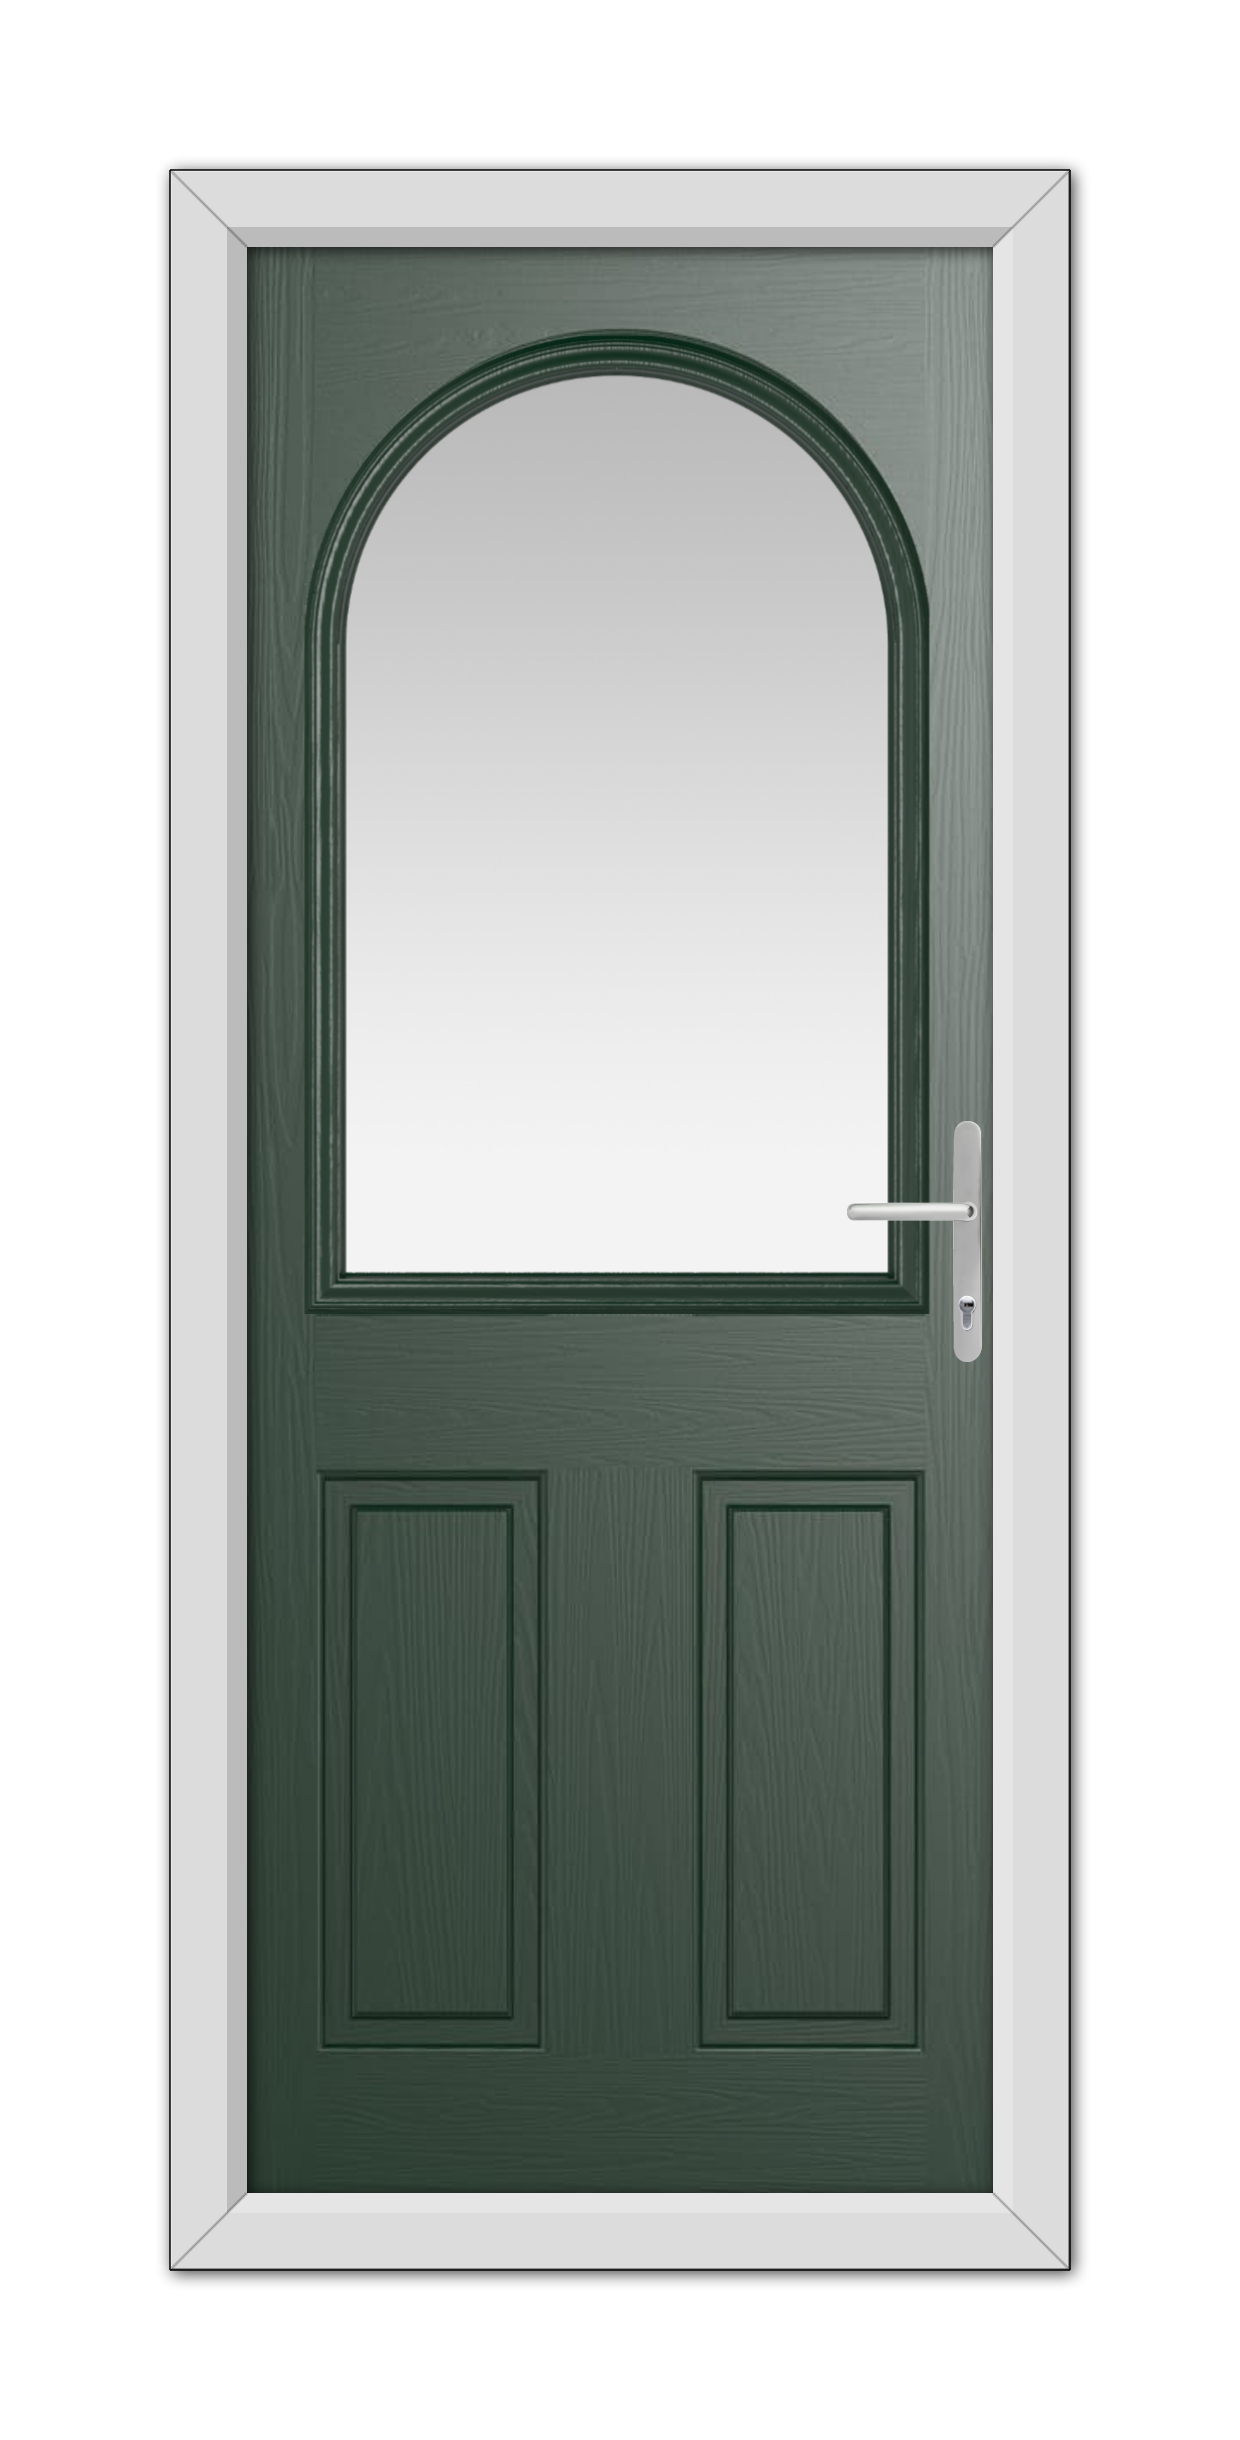 A Green Grafton Composite Door 48mm Timber Core with an arched window at the top, equipped with a silver handle and framed in white.